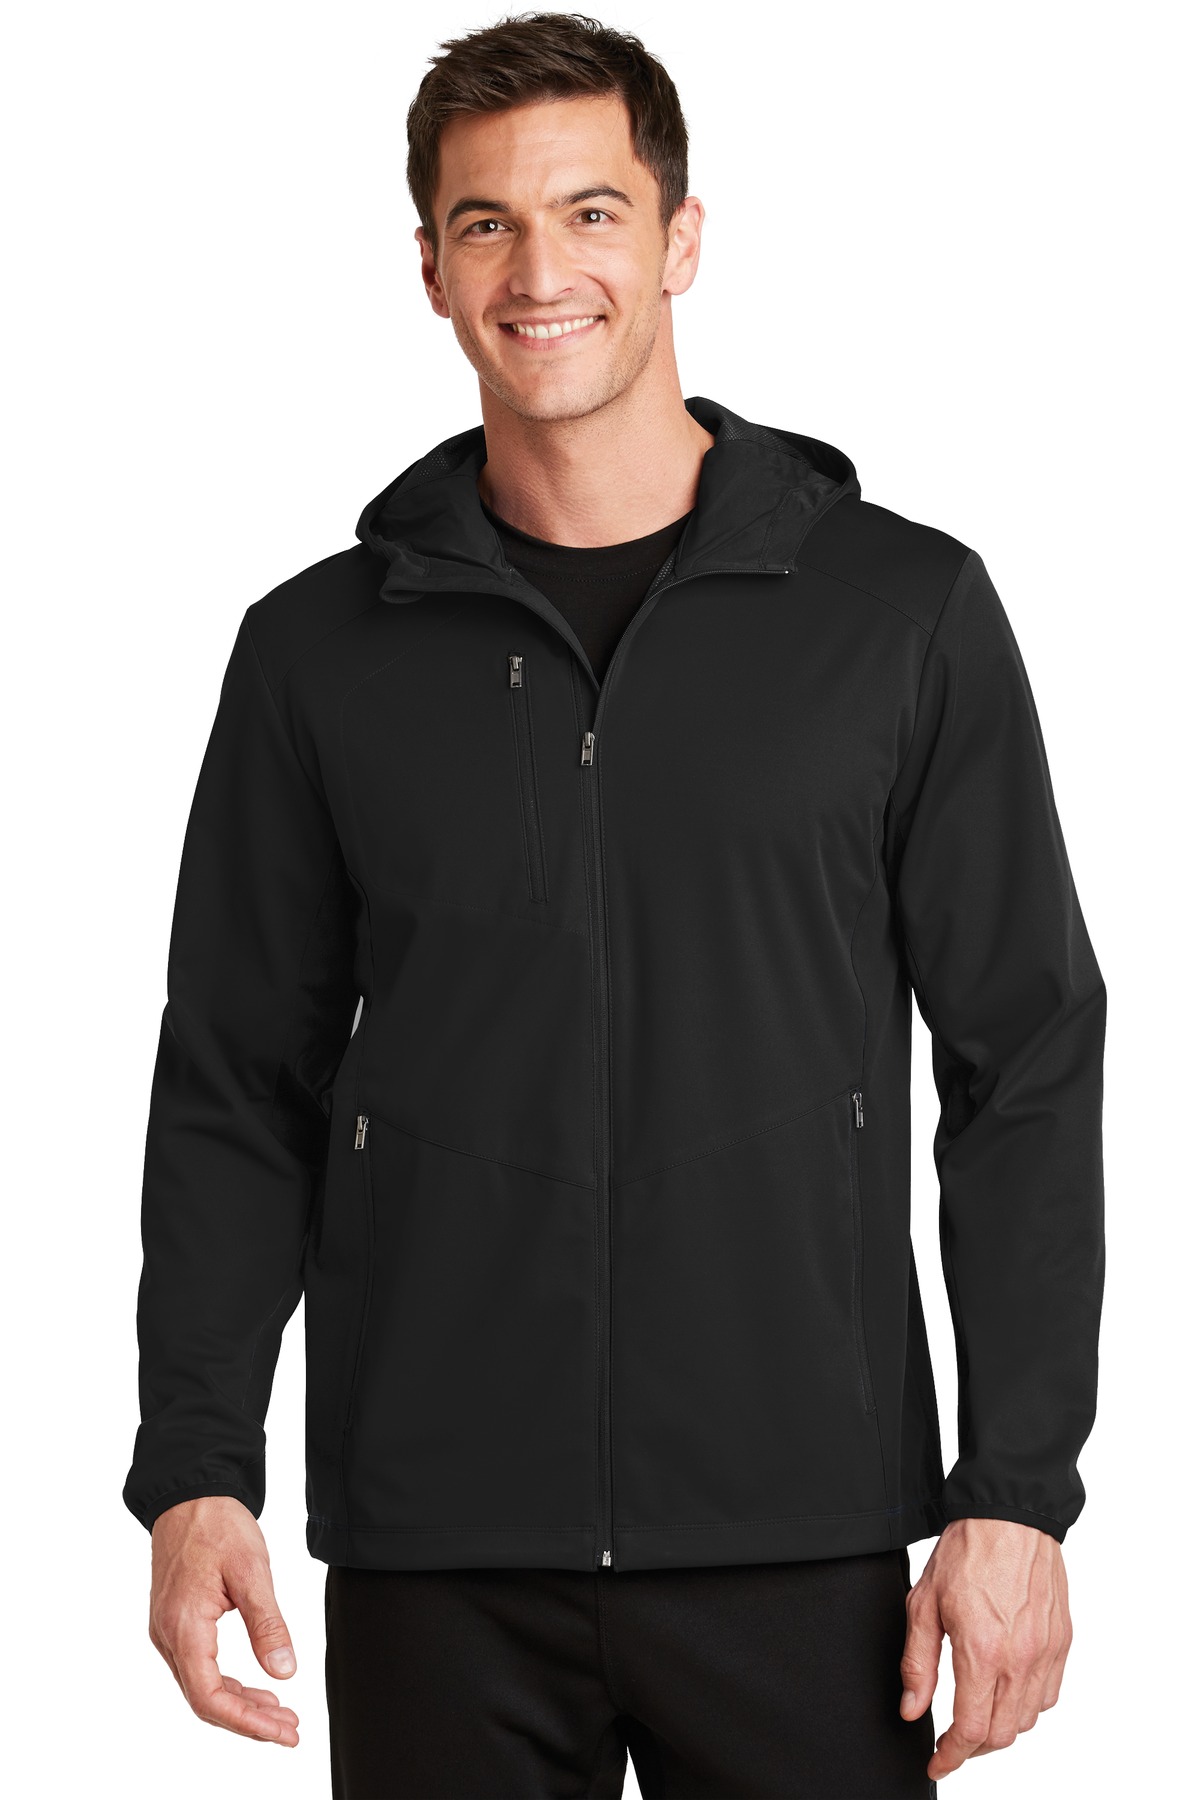 Port Authority Active Hooded Soft Shell Jacket-Port Authority